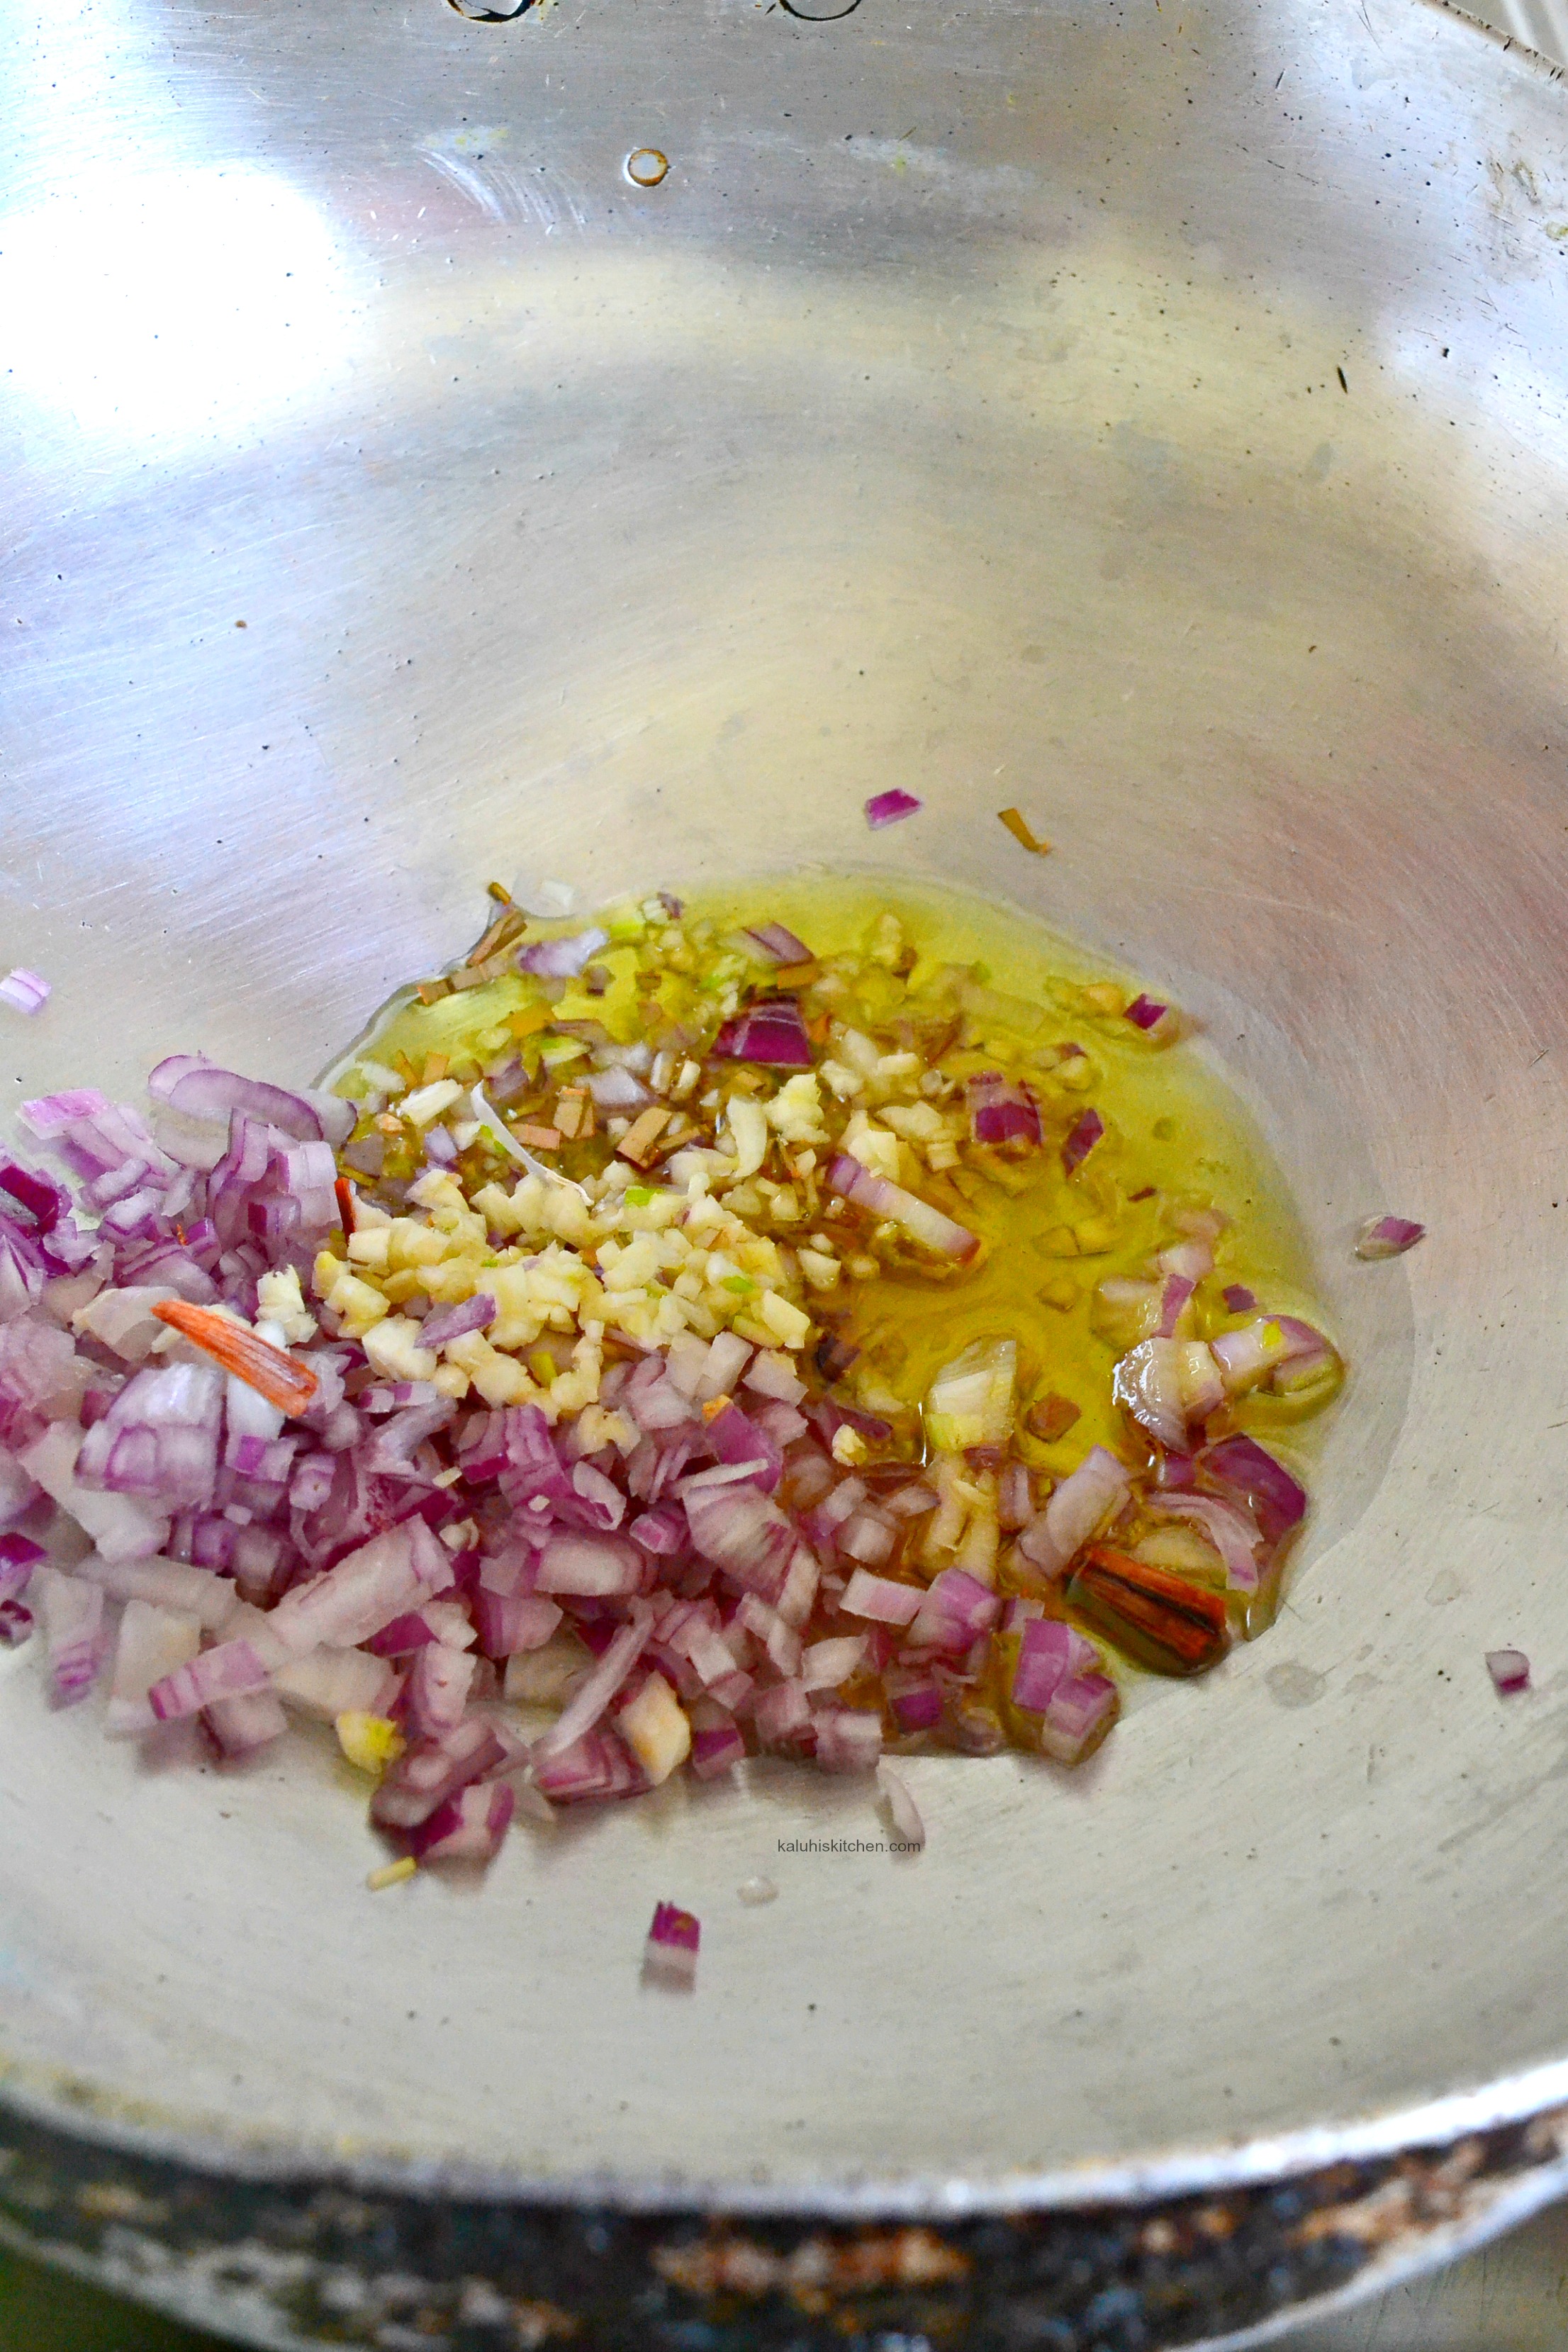 fry-the-onions-with-some-garlic-red-onion-and-bay-leaves-so-that-all-the-flavors-of-the-marinade-get-tied-into-the-stewing_kaluhiskitchen-com